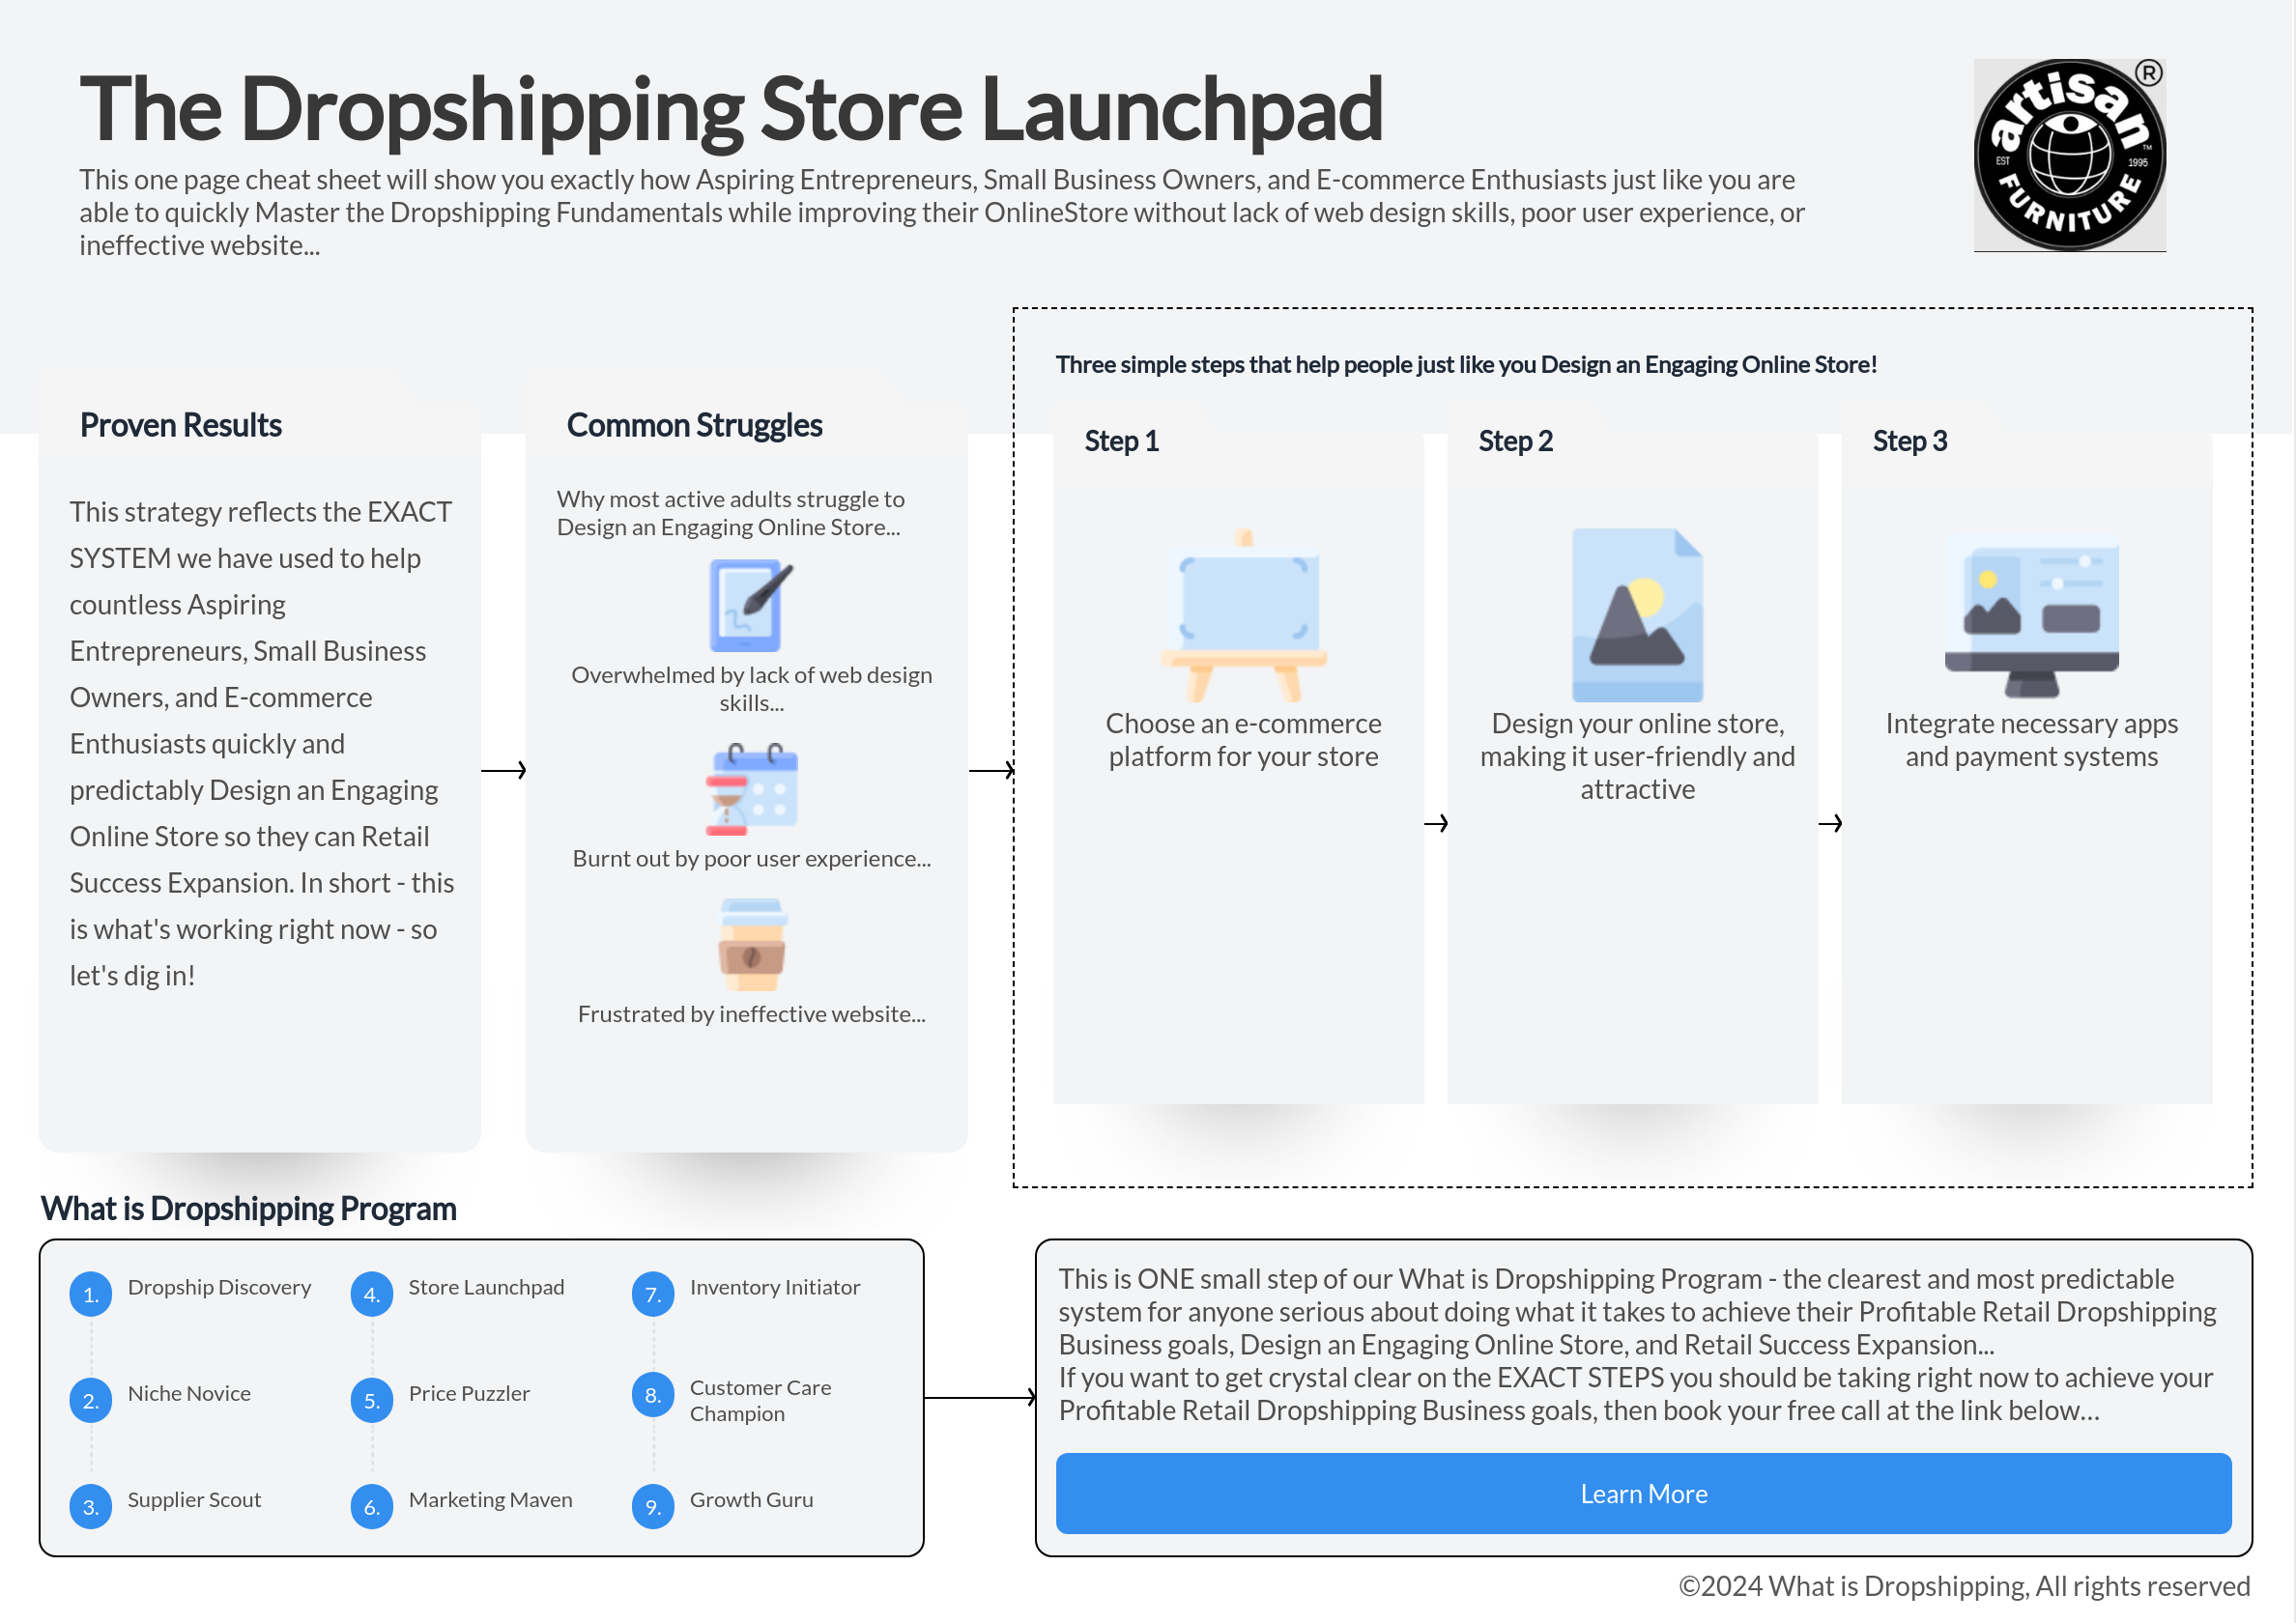 Infographic on dropshipping store setup strategies and tips.